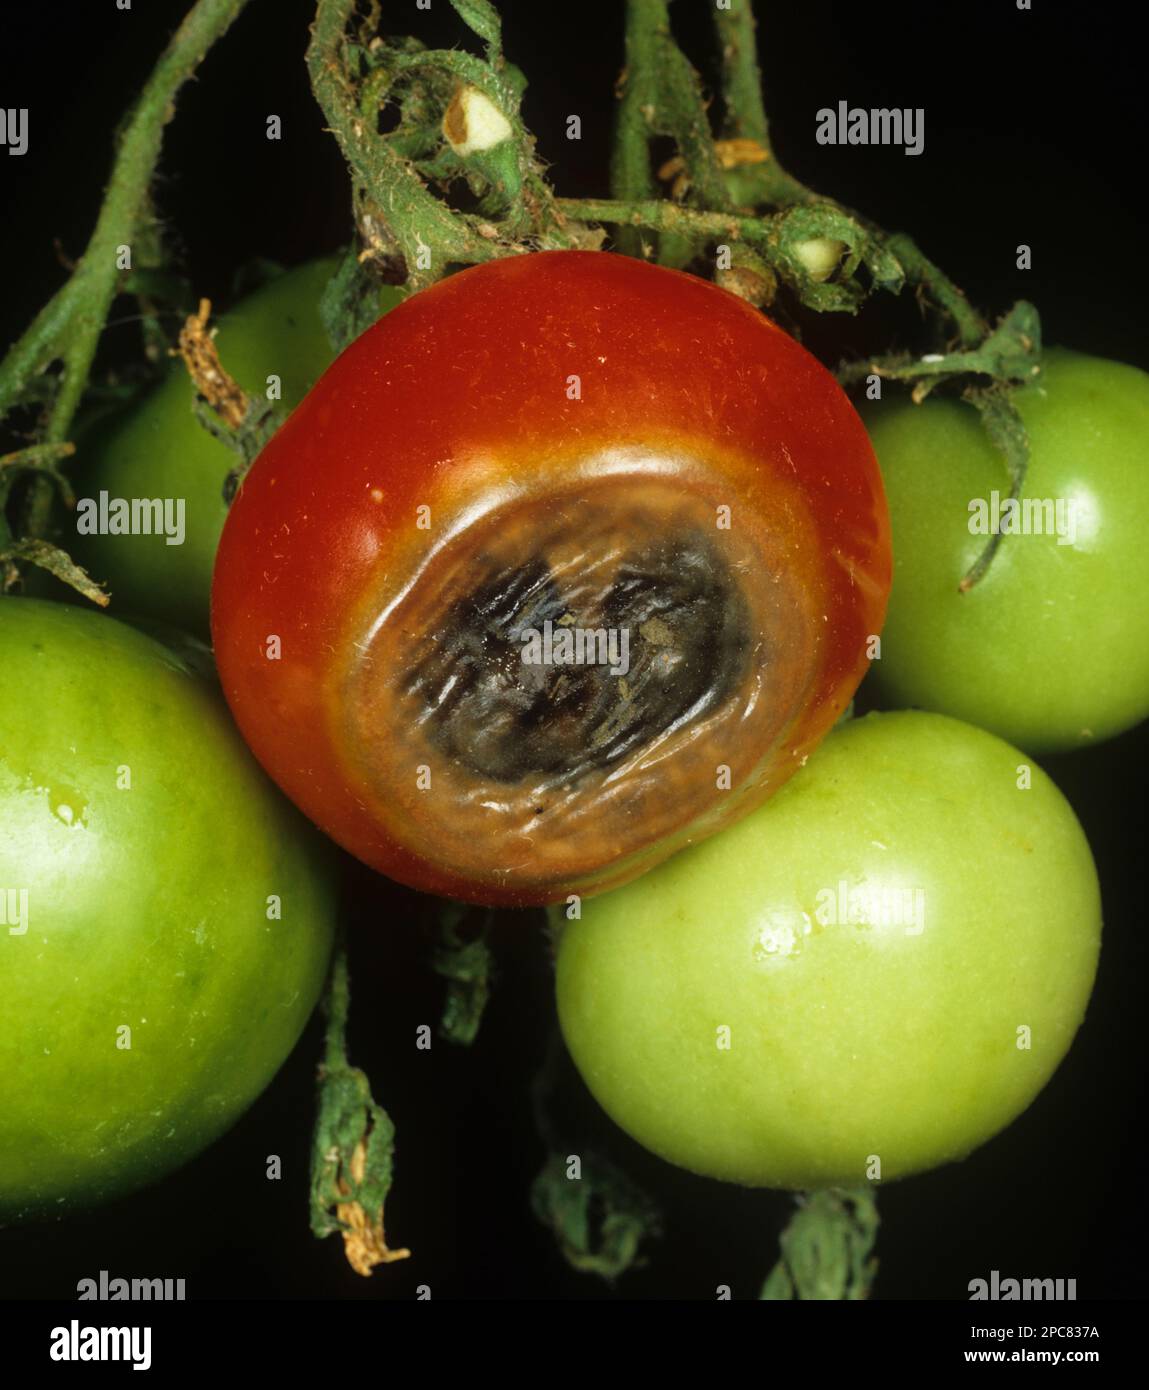 Blossom and end rot on tomato fruits caused by calcium deficiency Stock Photo